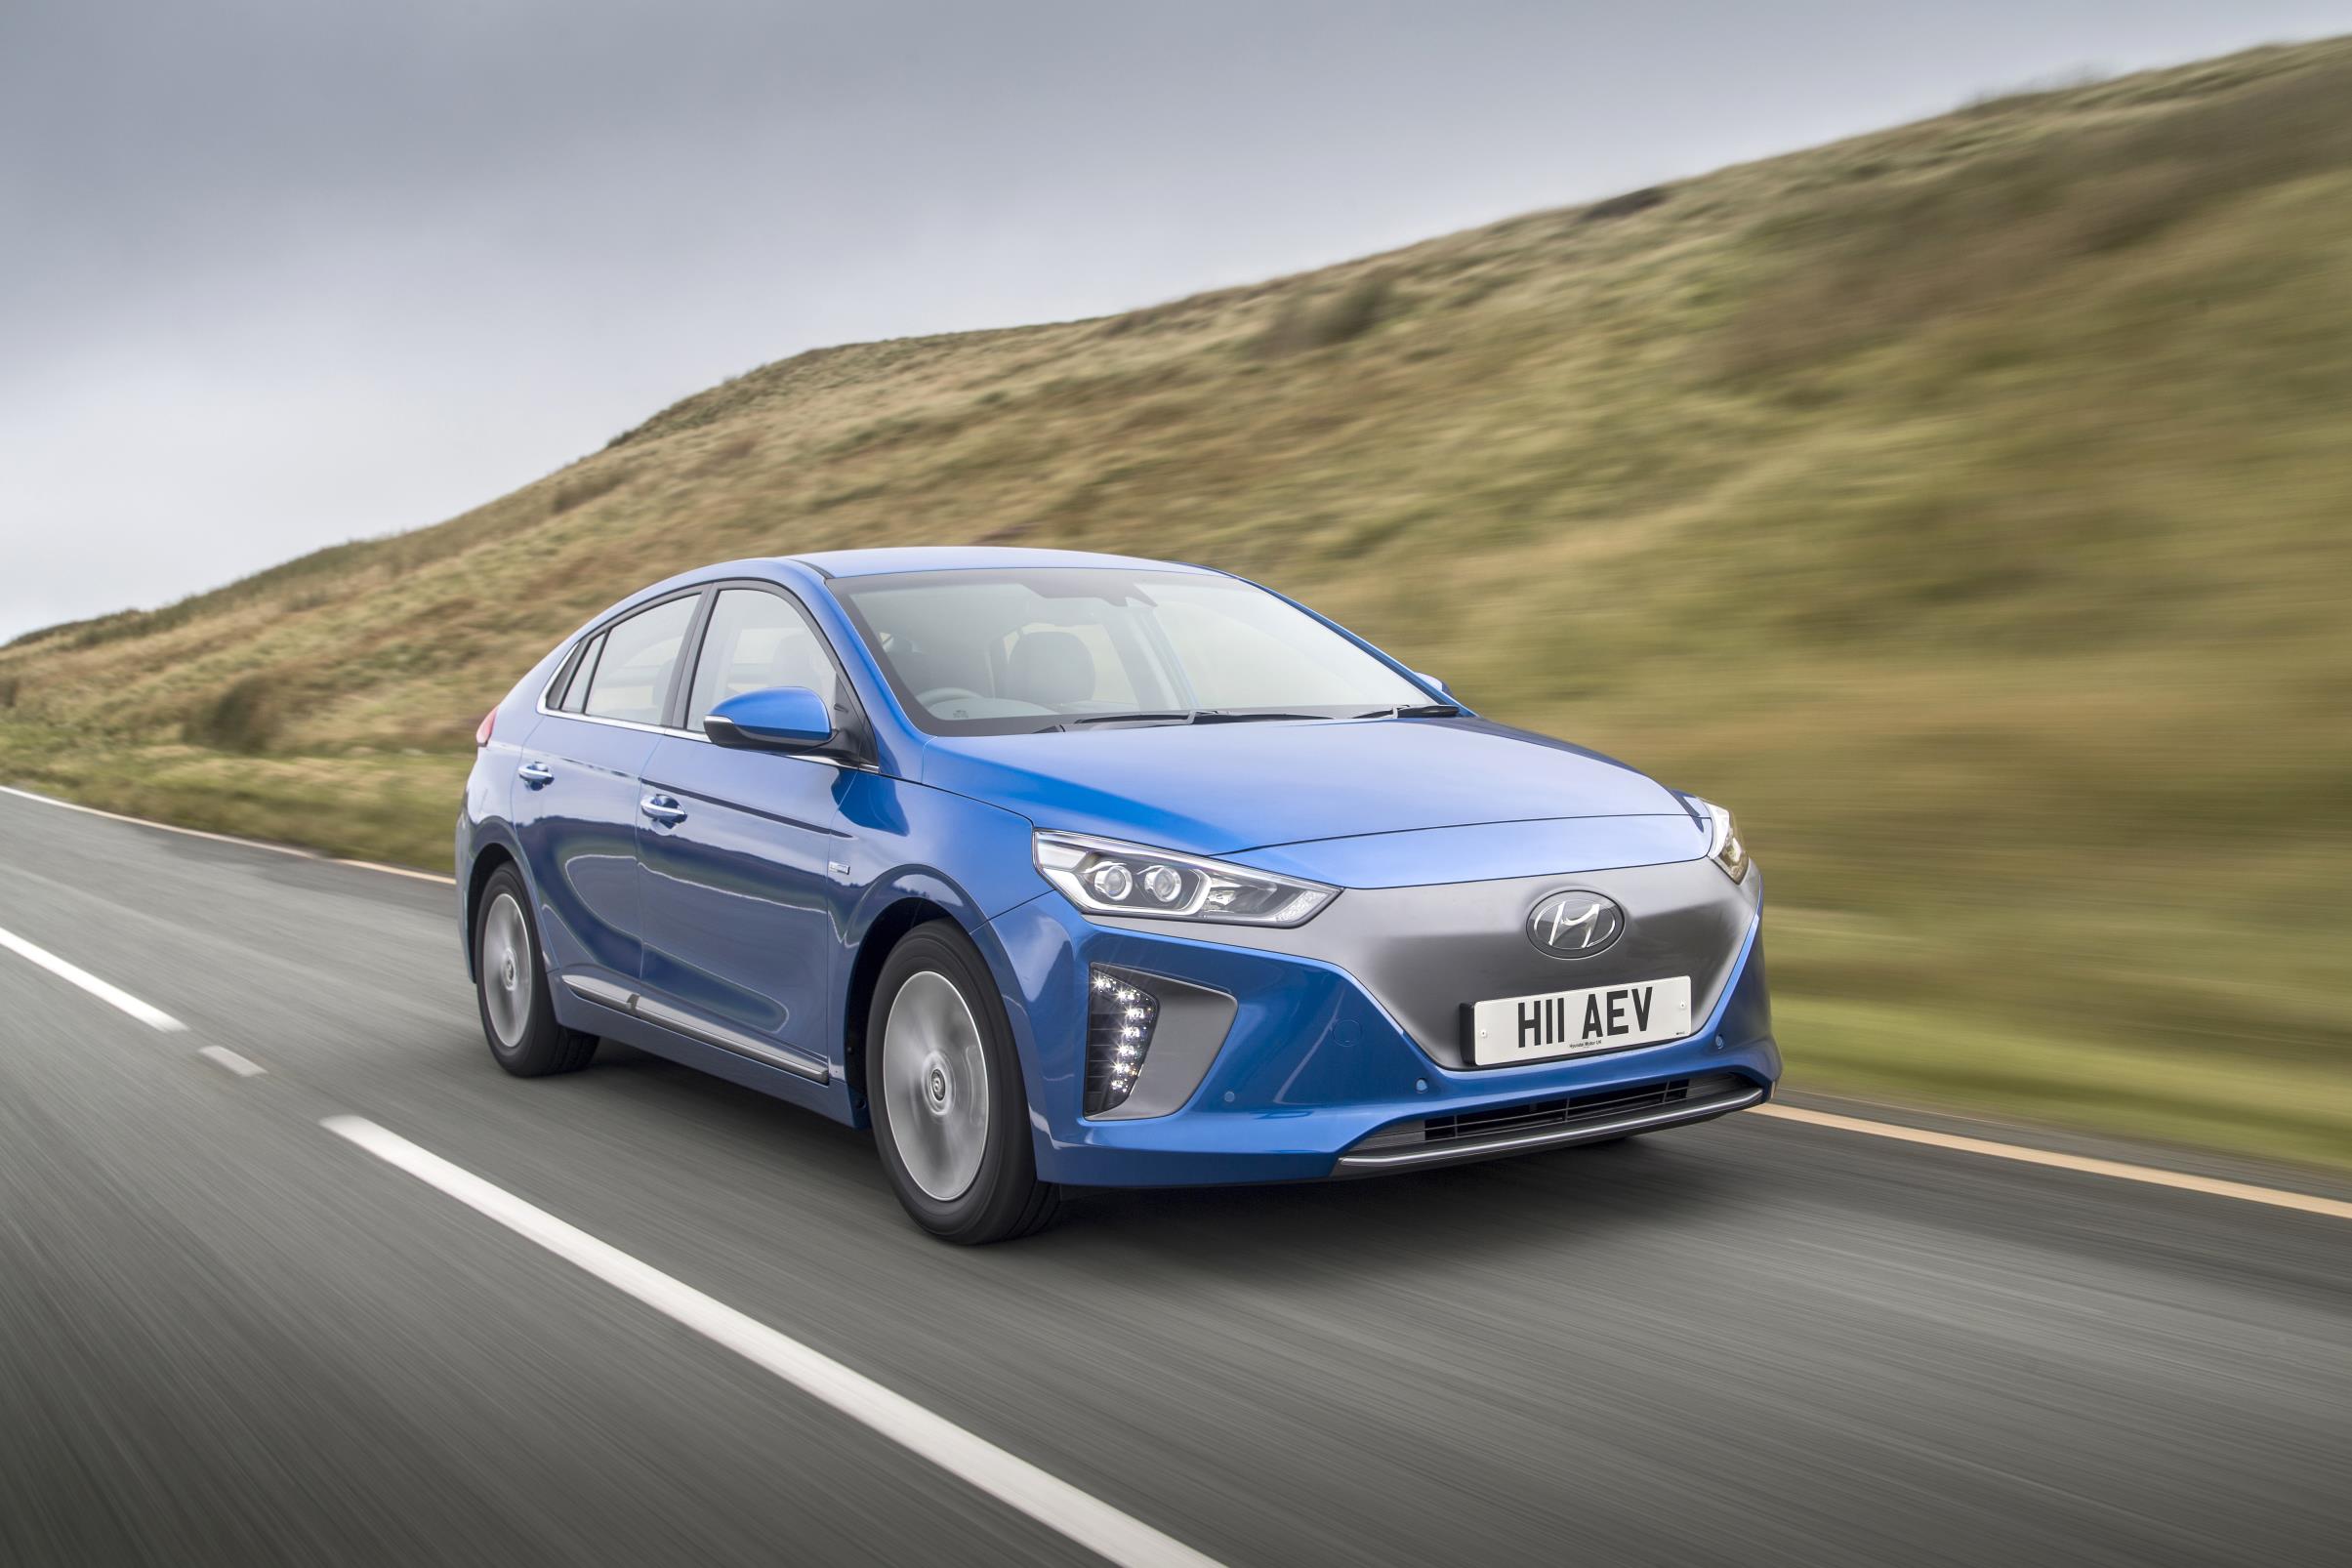 2017 Hyundai Ioniq Electric Priced In the UK From £24,495, PHEV Due in Q2  2017 - autoevolution